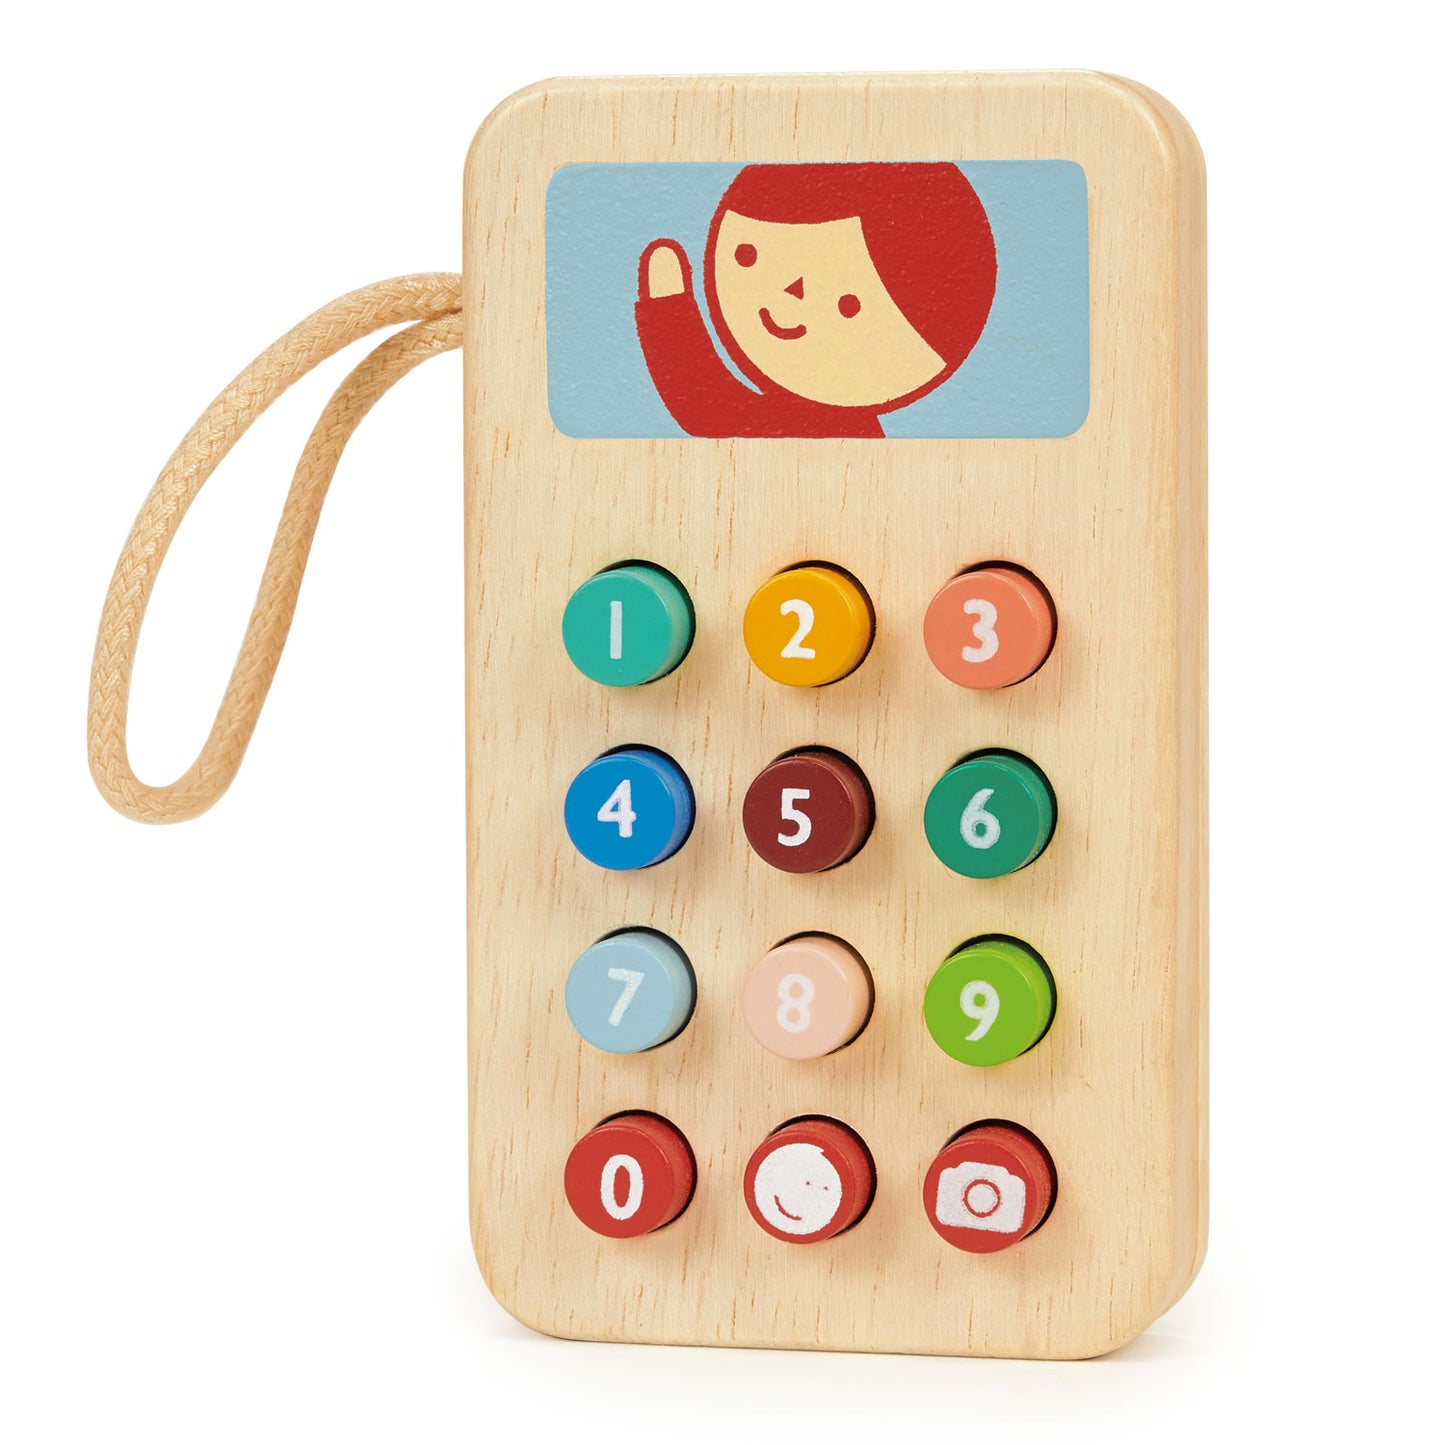 Wooden Mobile Phone by Mentari Toys